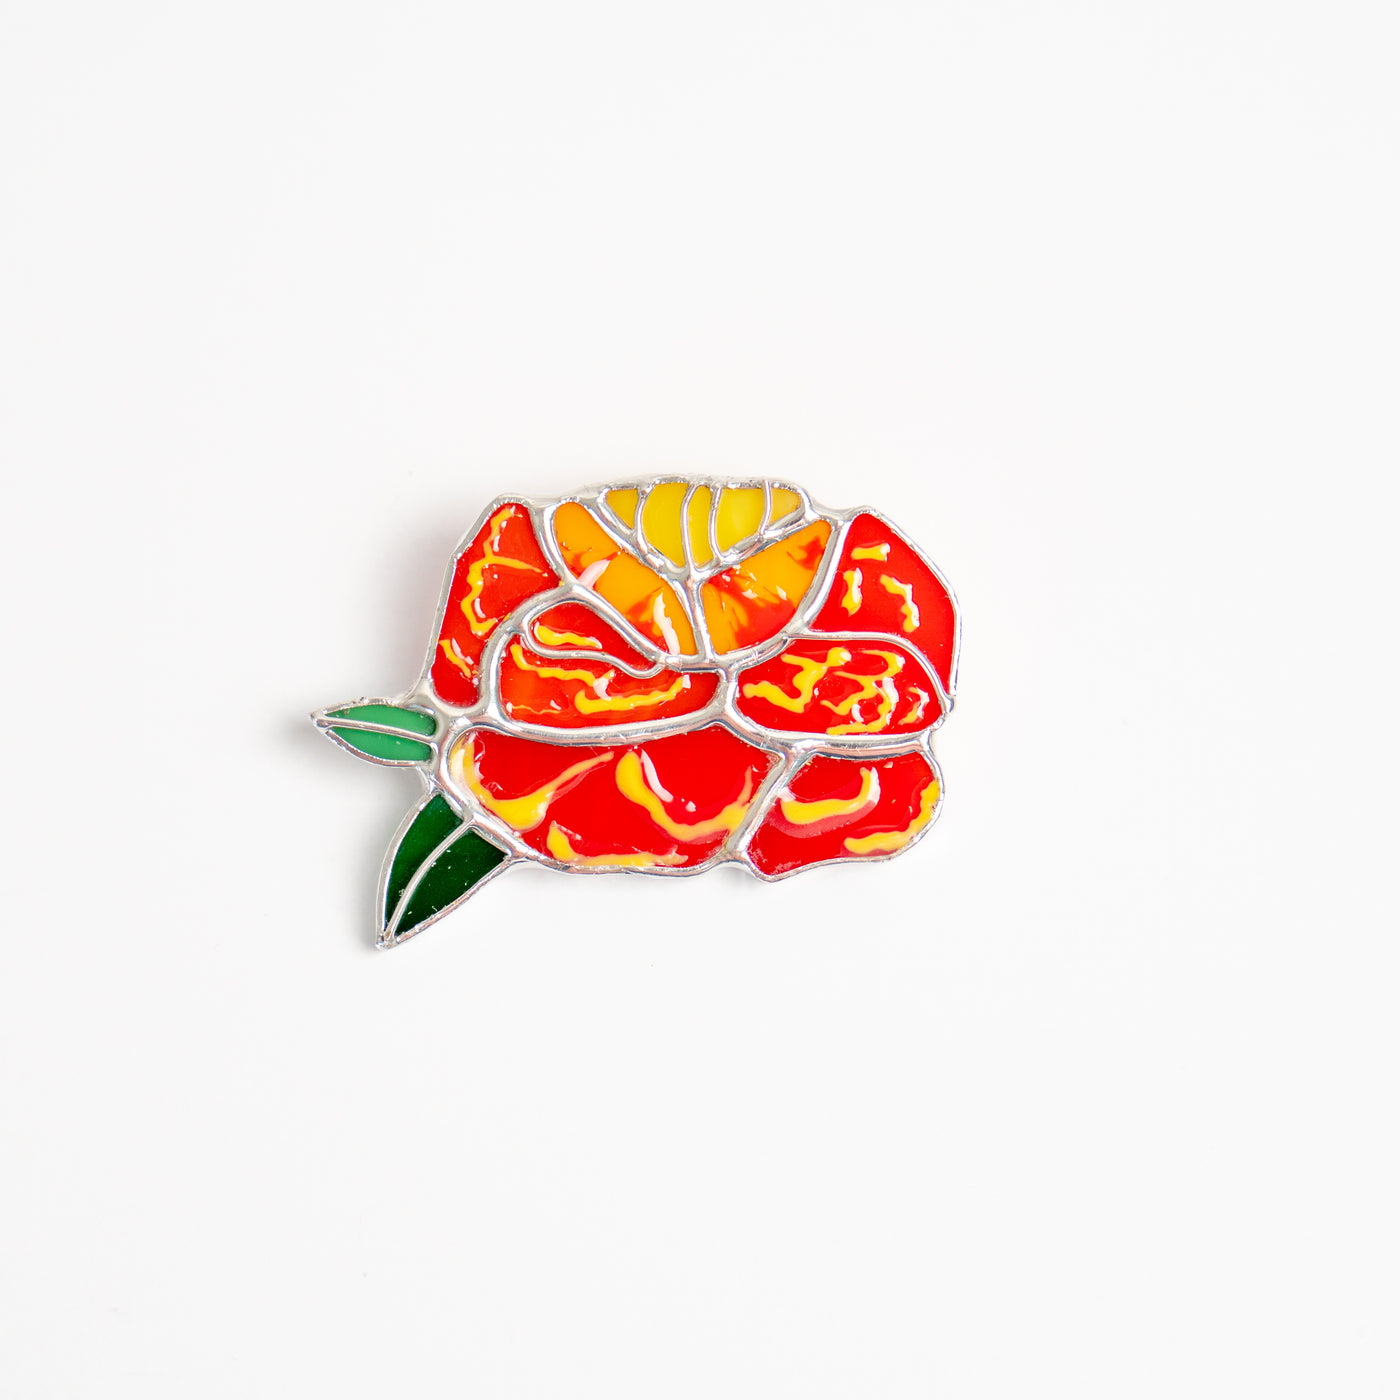 Stained glass marigold flower with two green leaves brooch 